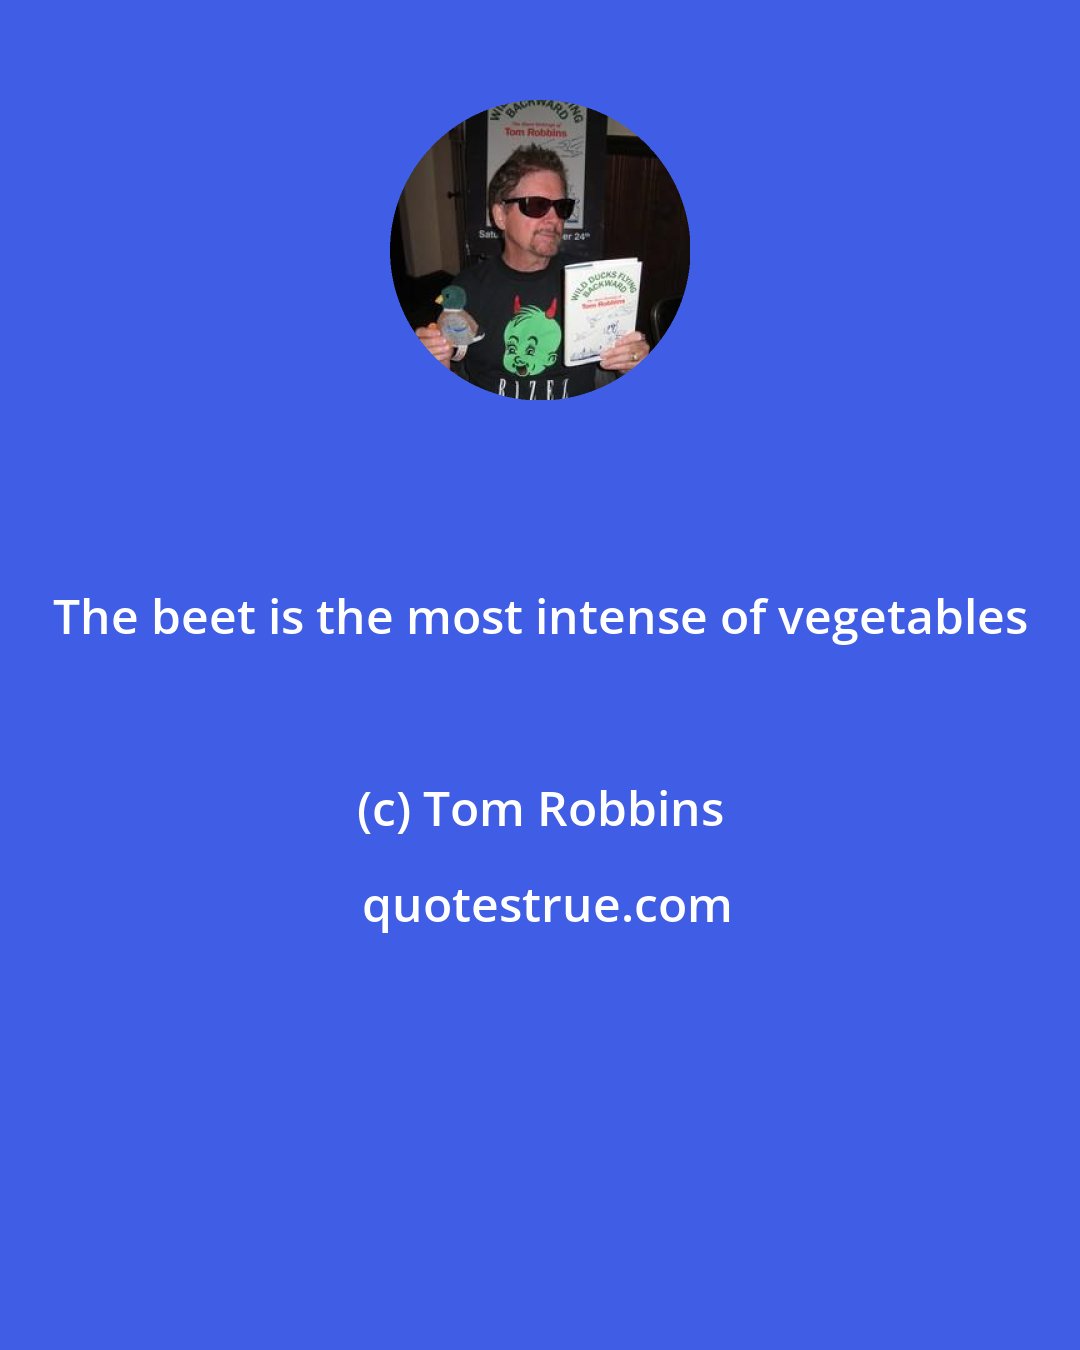 Tom Robbins: The beet is the most intense of vegetables